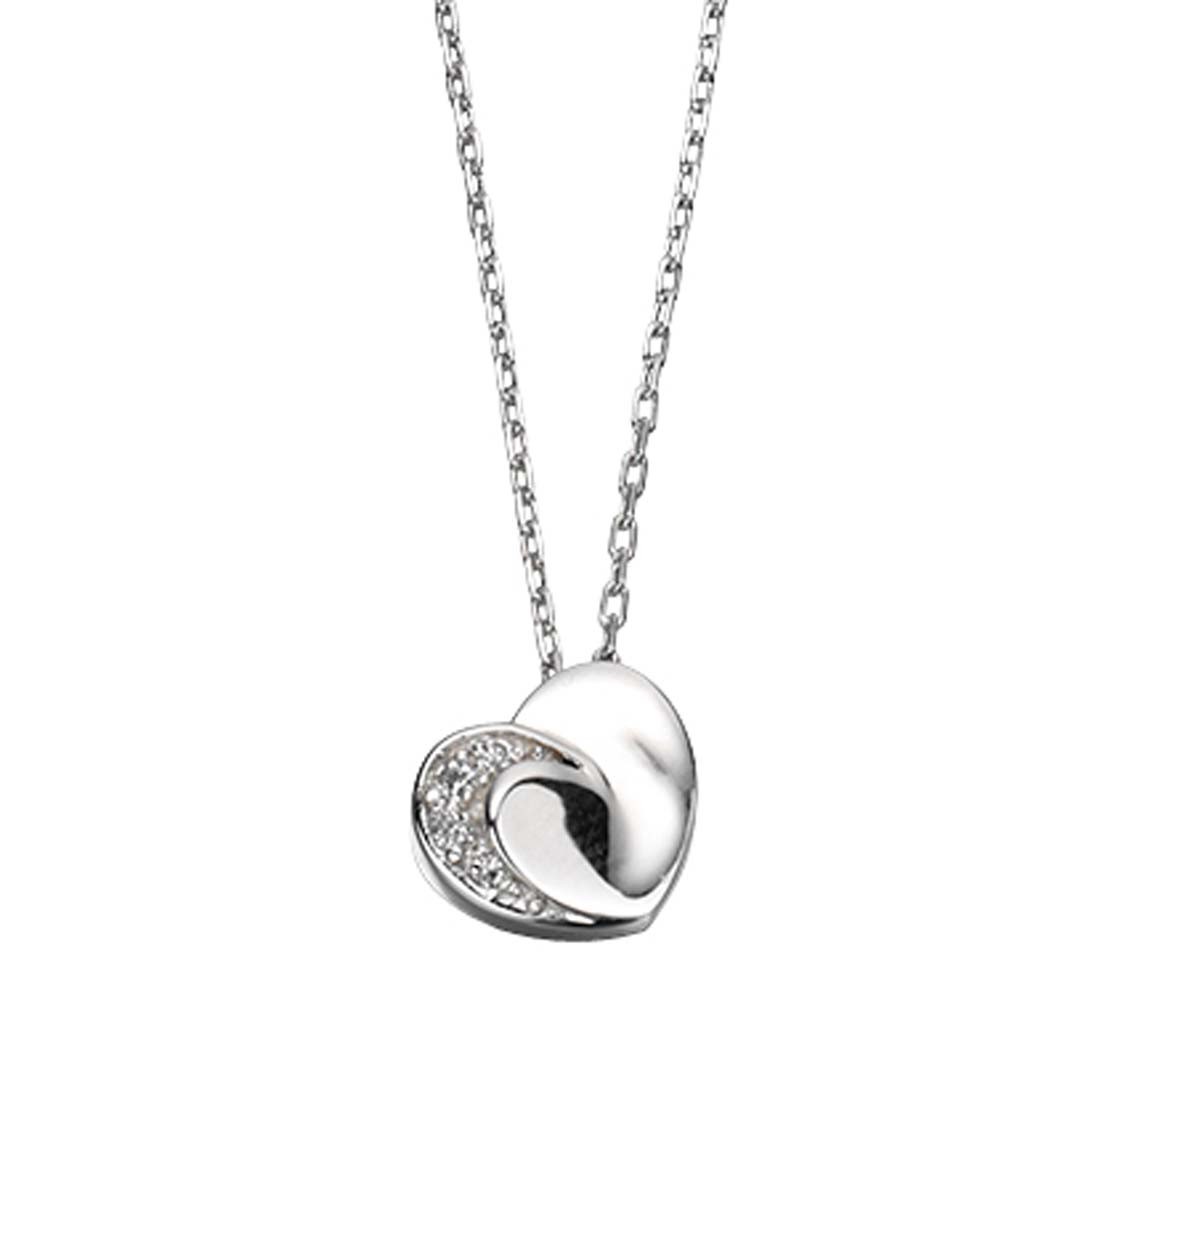 silver necklaces for women silver necklaces jqrhdyo